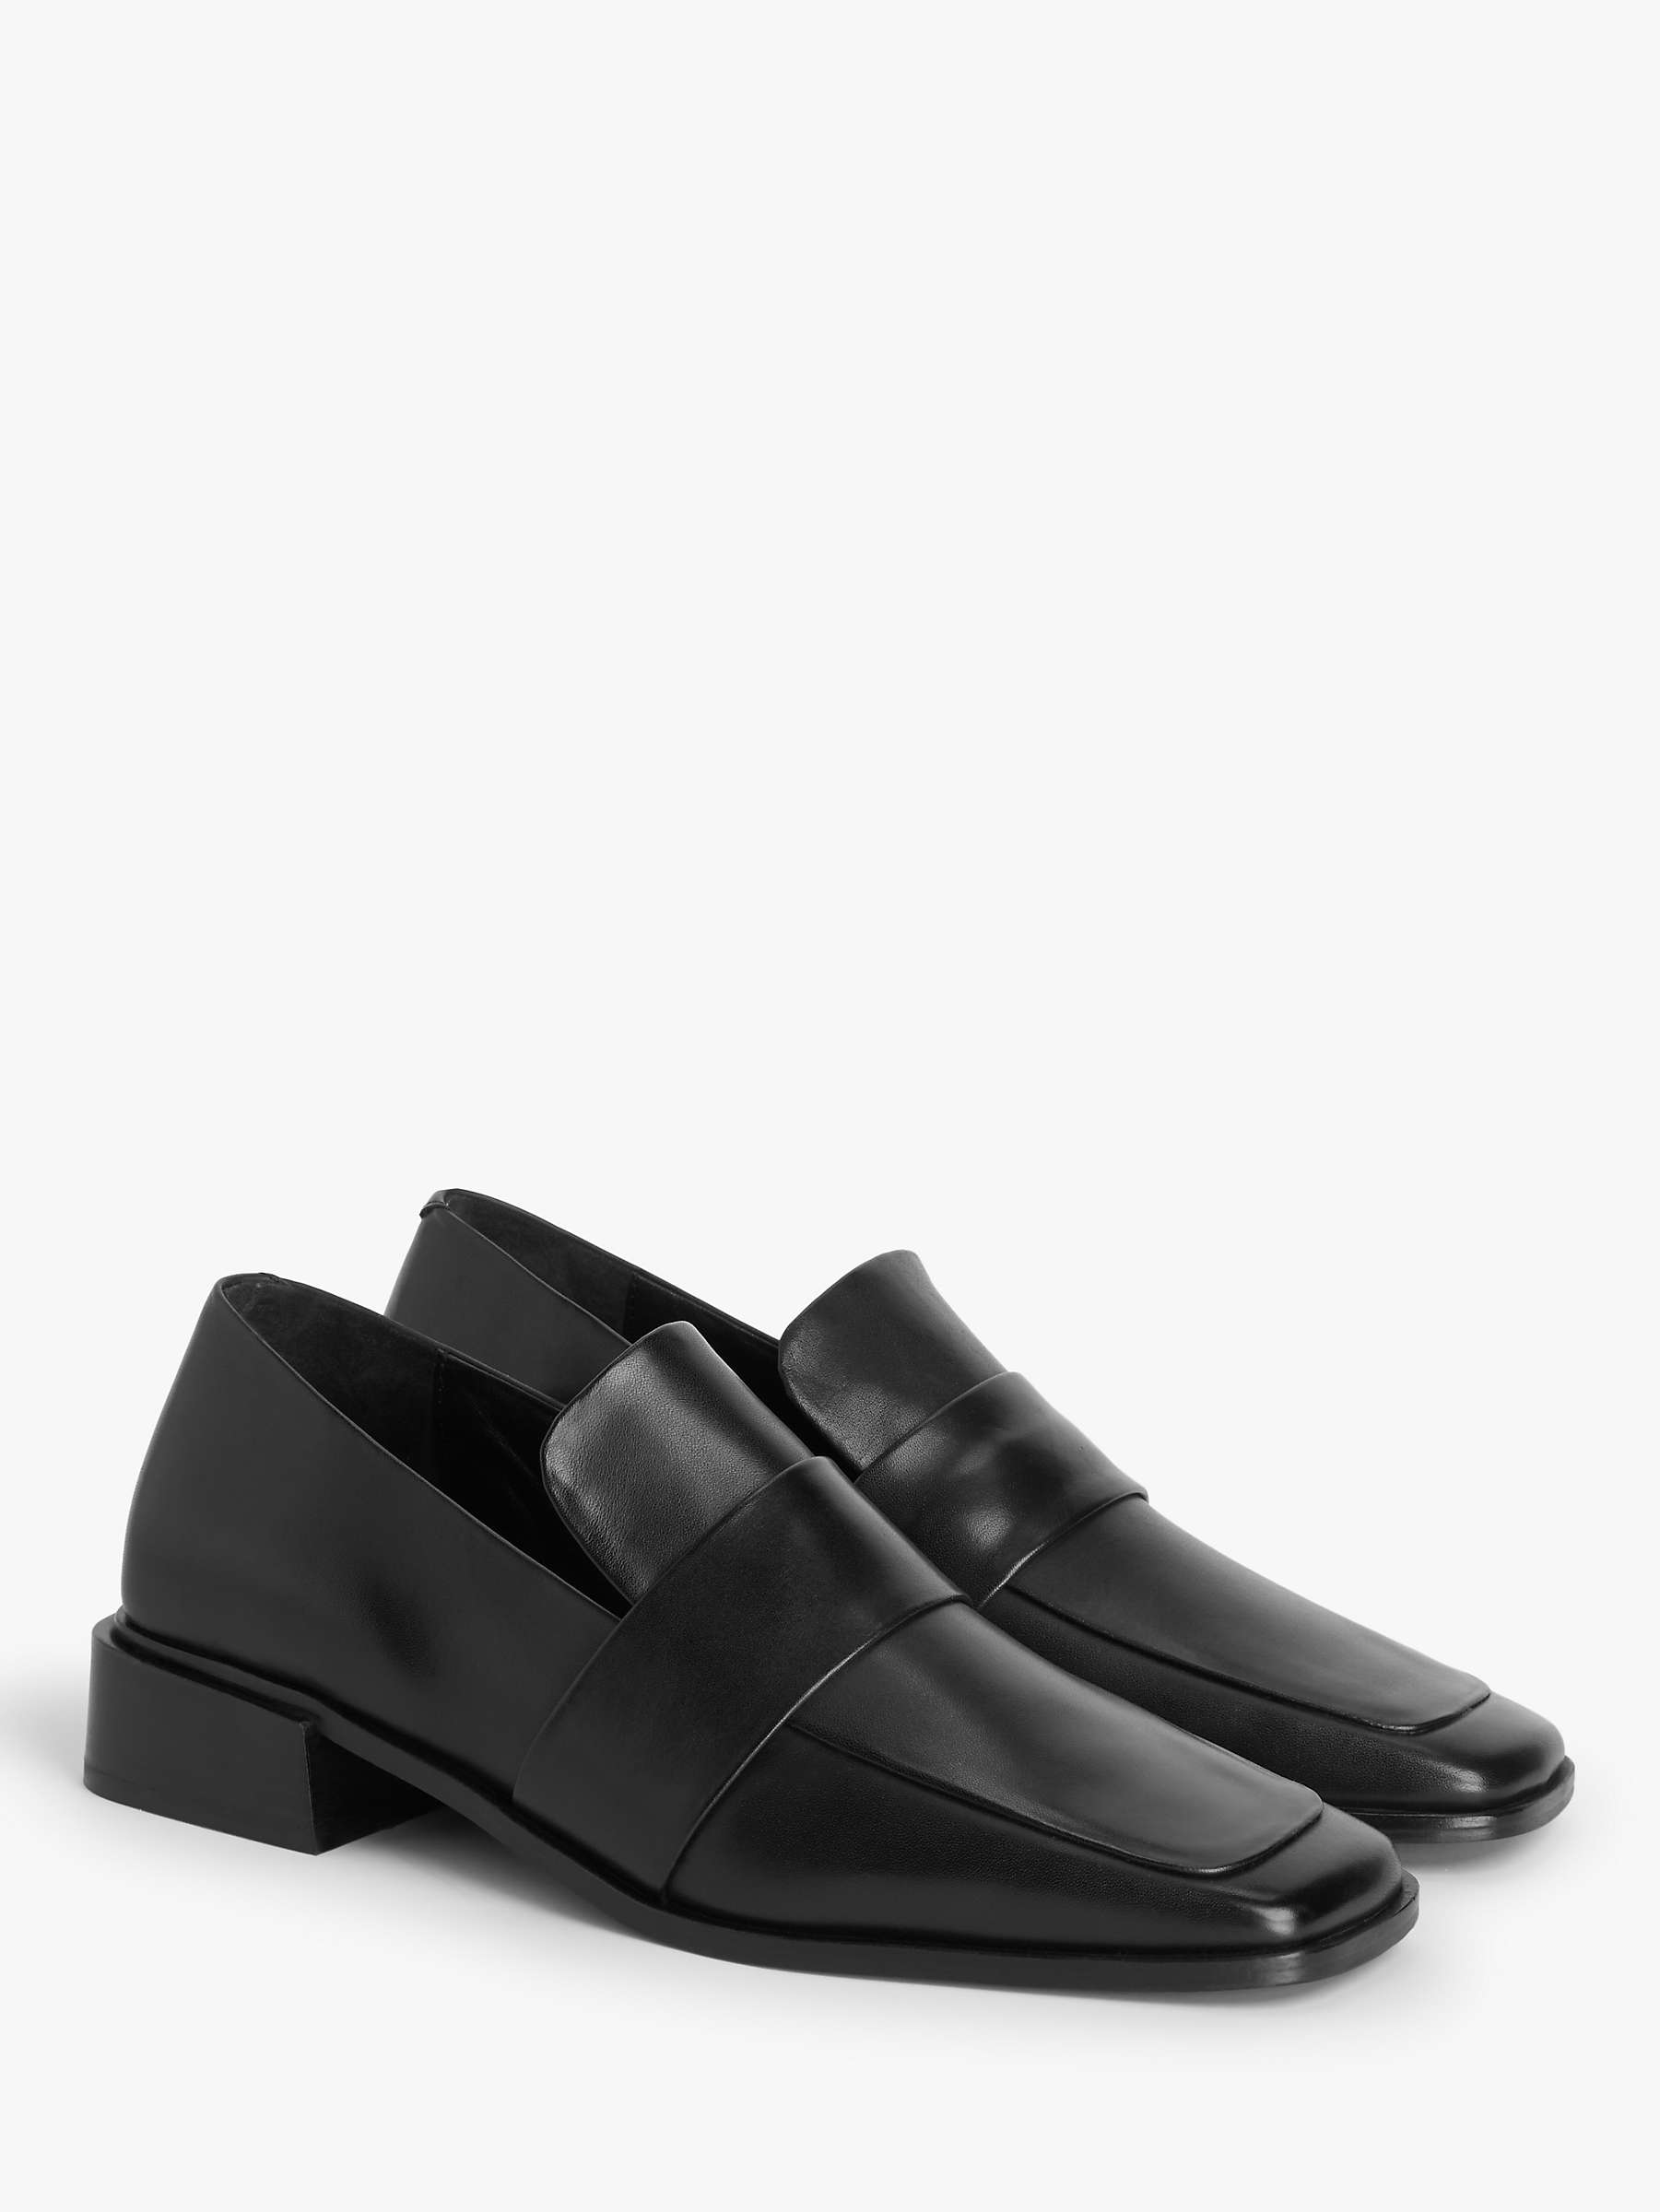 Kin Faye Leather Square Toe Dressy Loafers, Black at John Lewis & Partners